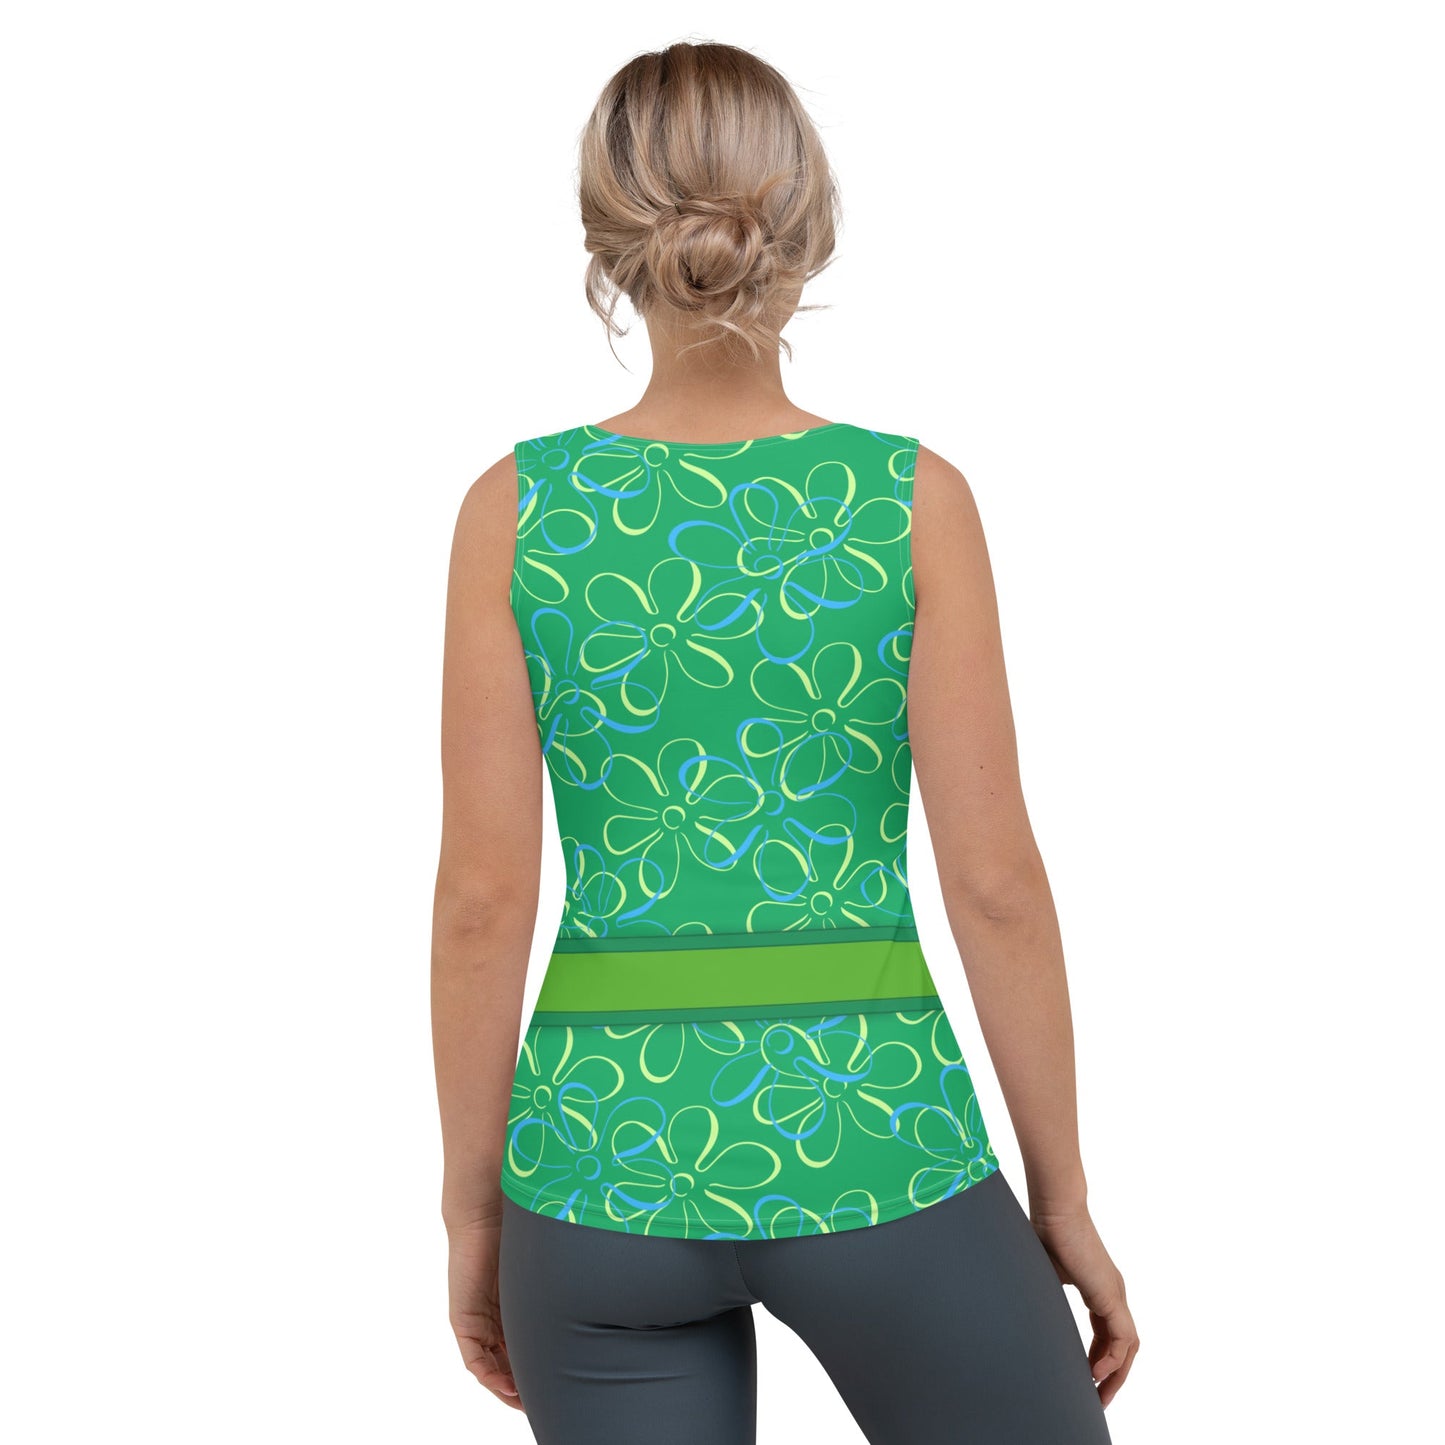 The Disgust Emotion Tank Top disgust costumedisgust styleWrong Lever Clothing